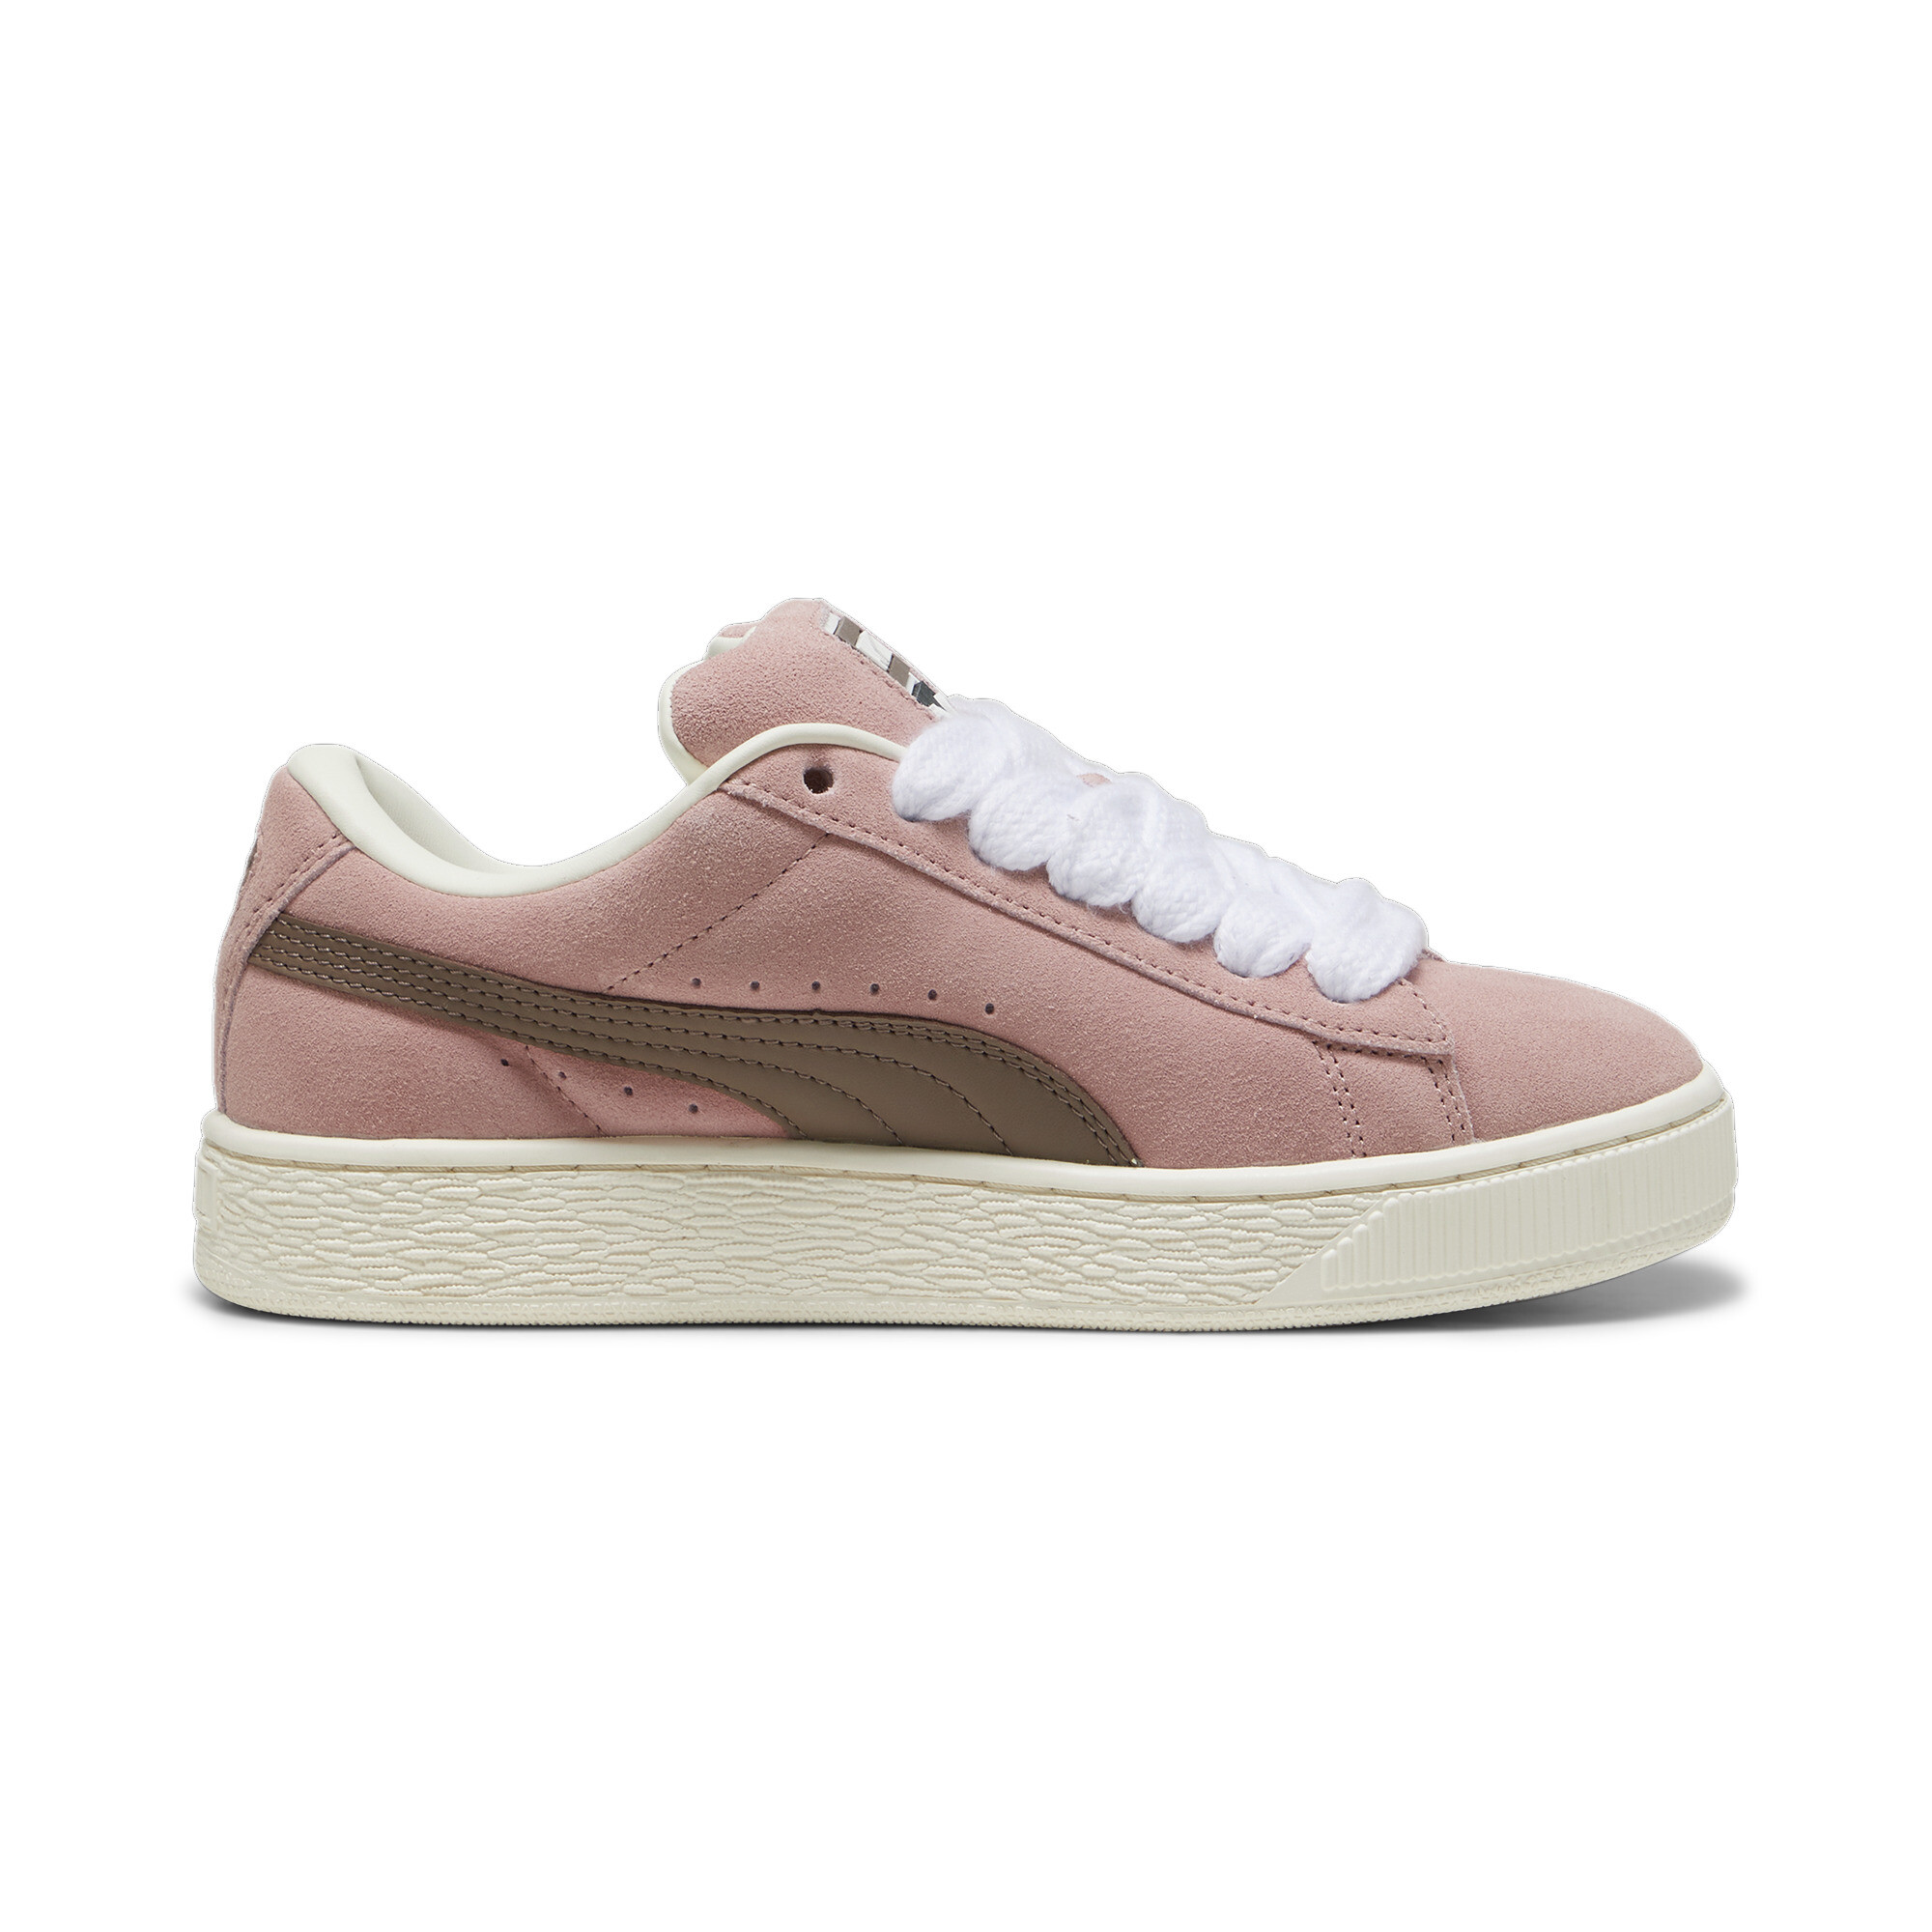 Puma Suede XL Sneakers Unisex, Pink, Size 40.5, Shoes